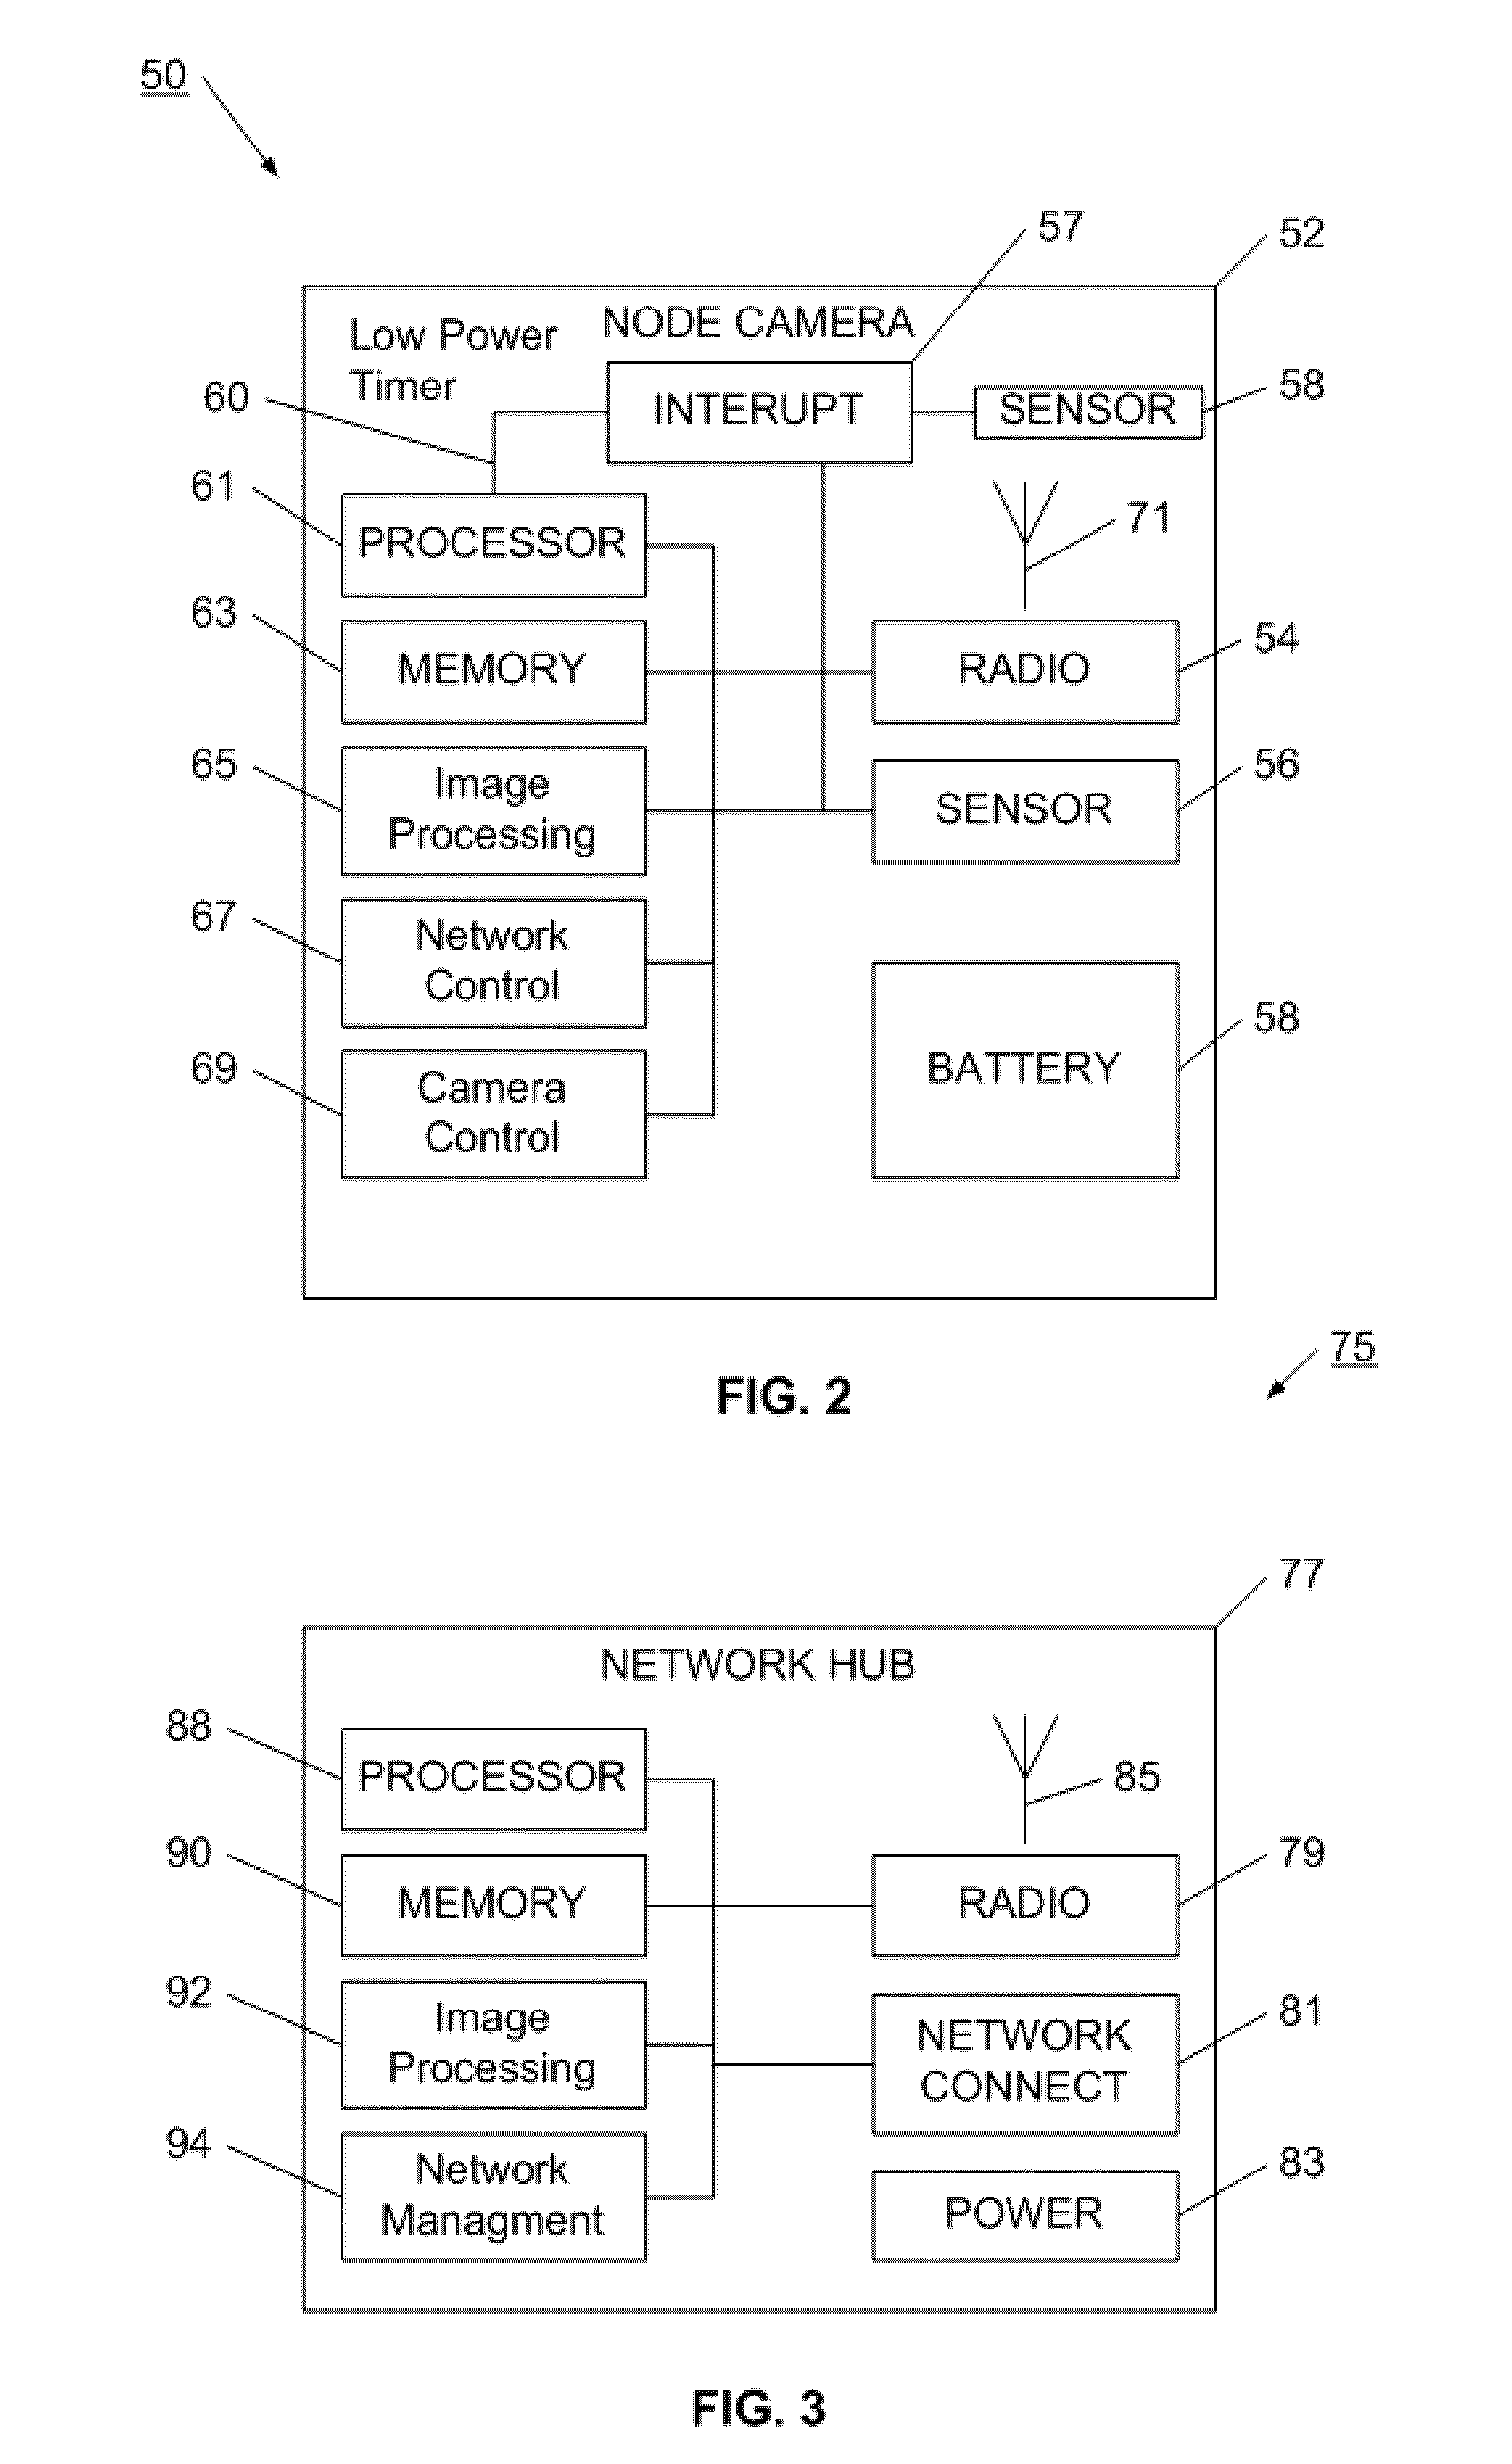 Advanced magnification device and method for low-power sensor systems